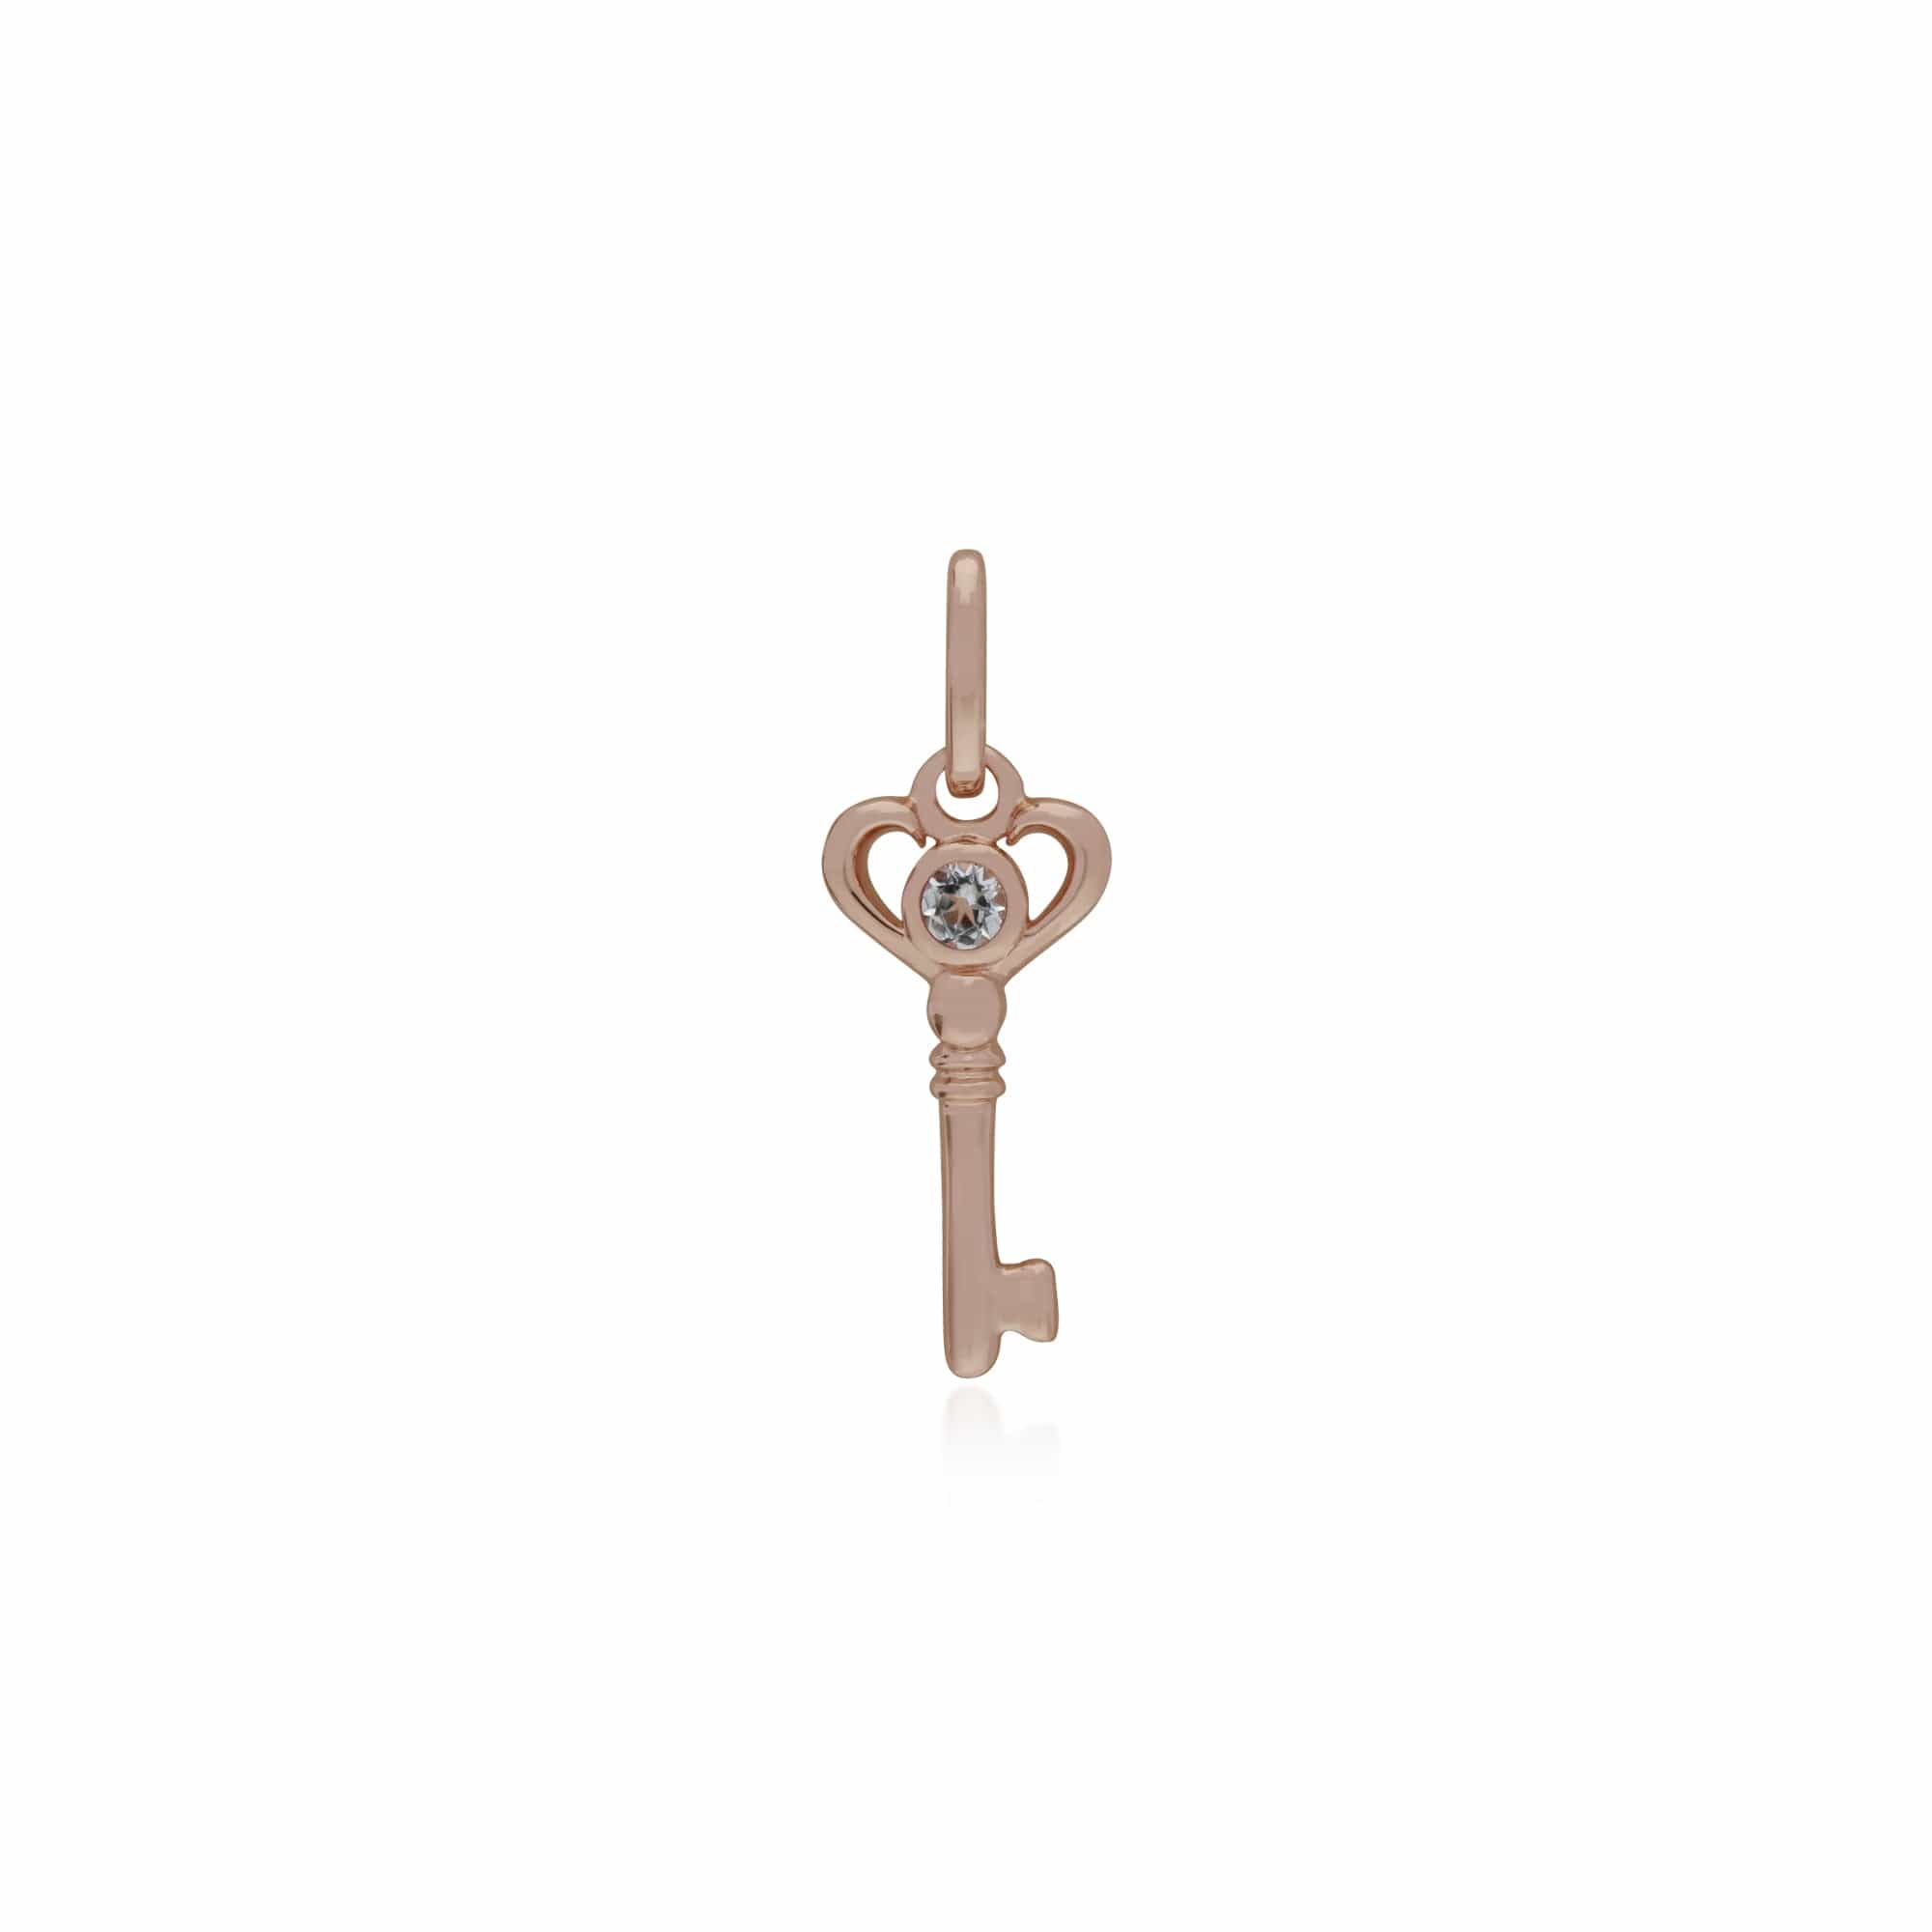 270P026310925-270P026501925 Classic Swirl Heart Lock Pendant & Clear Topaz Key Charm in Rose Gold Plated 925 Sterling Silver 2